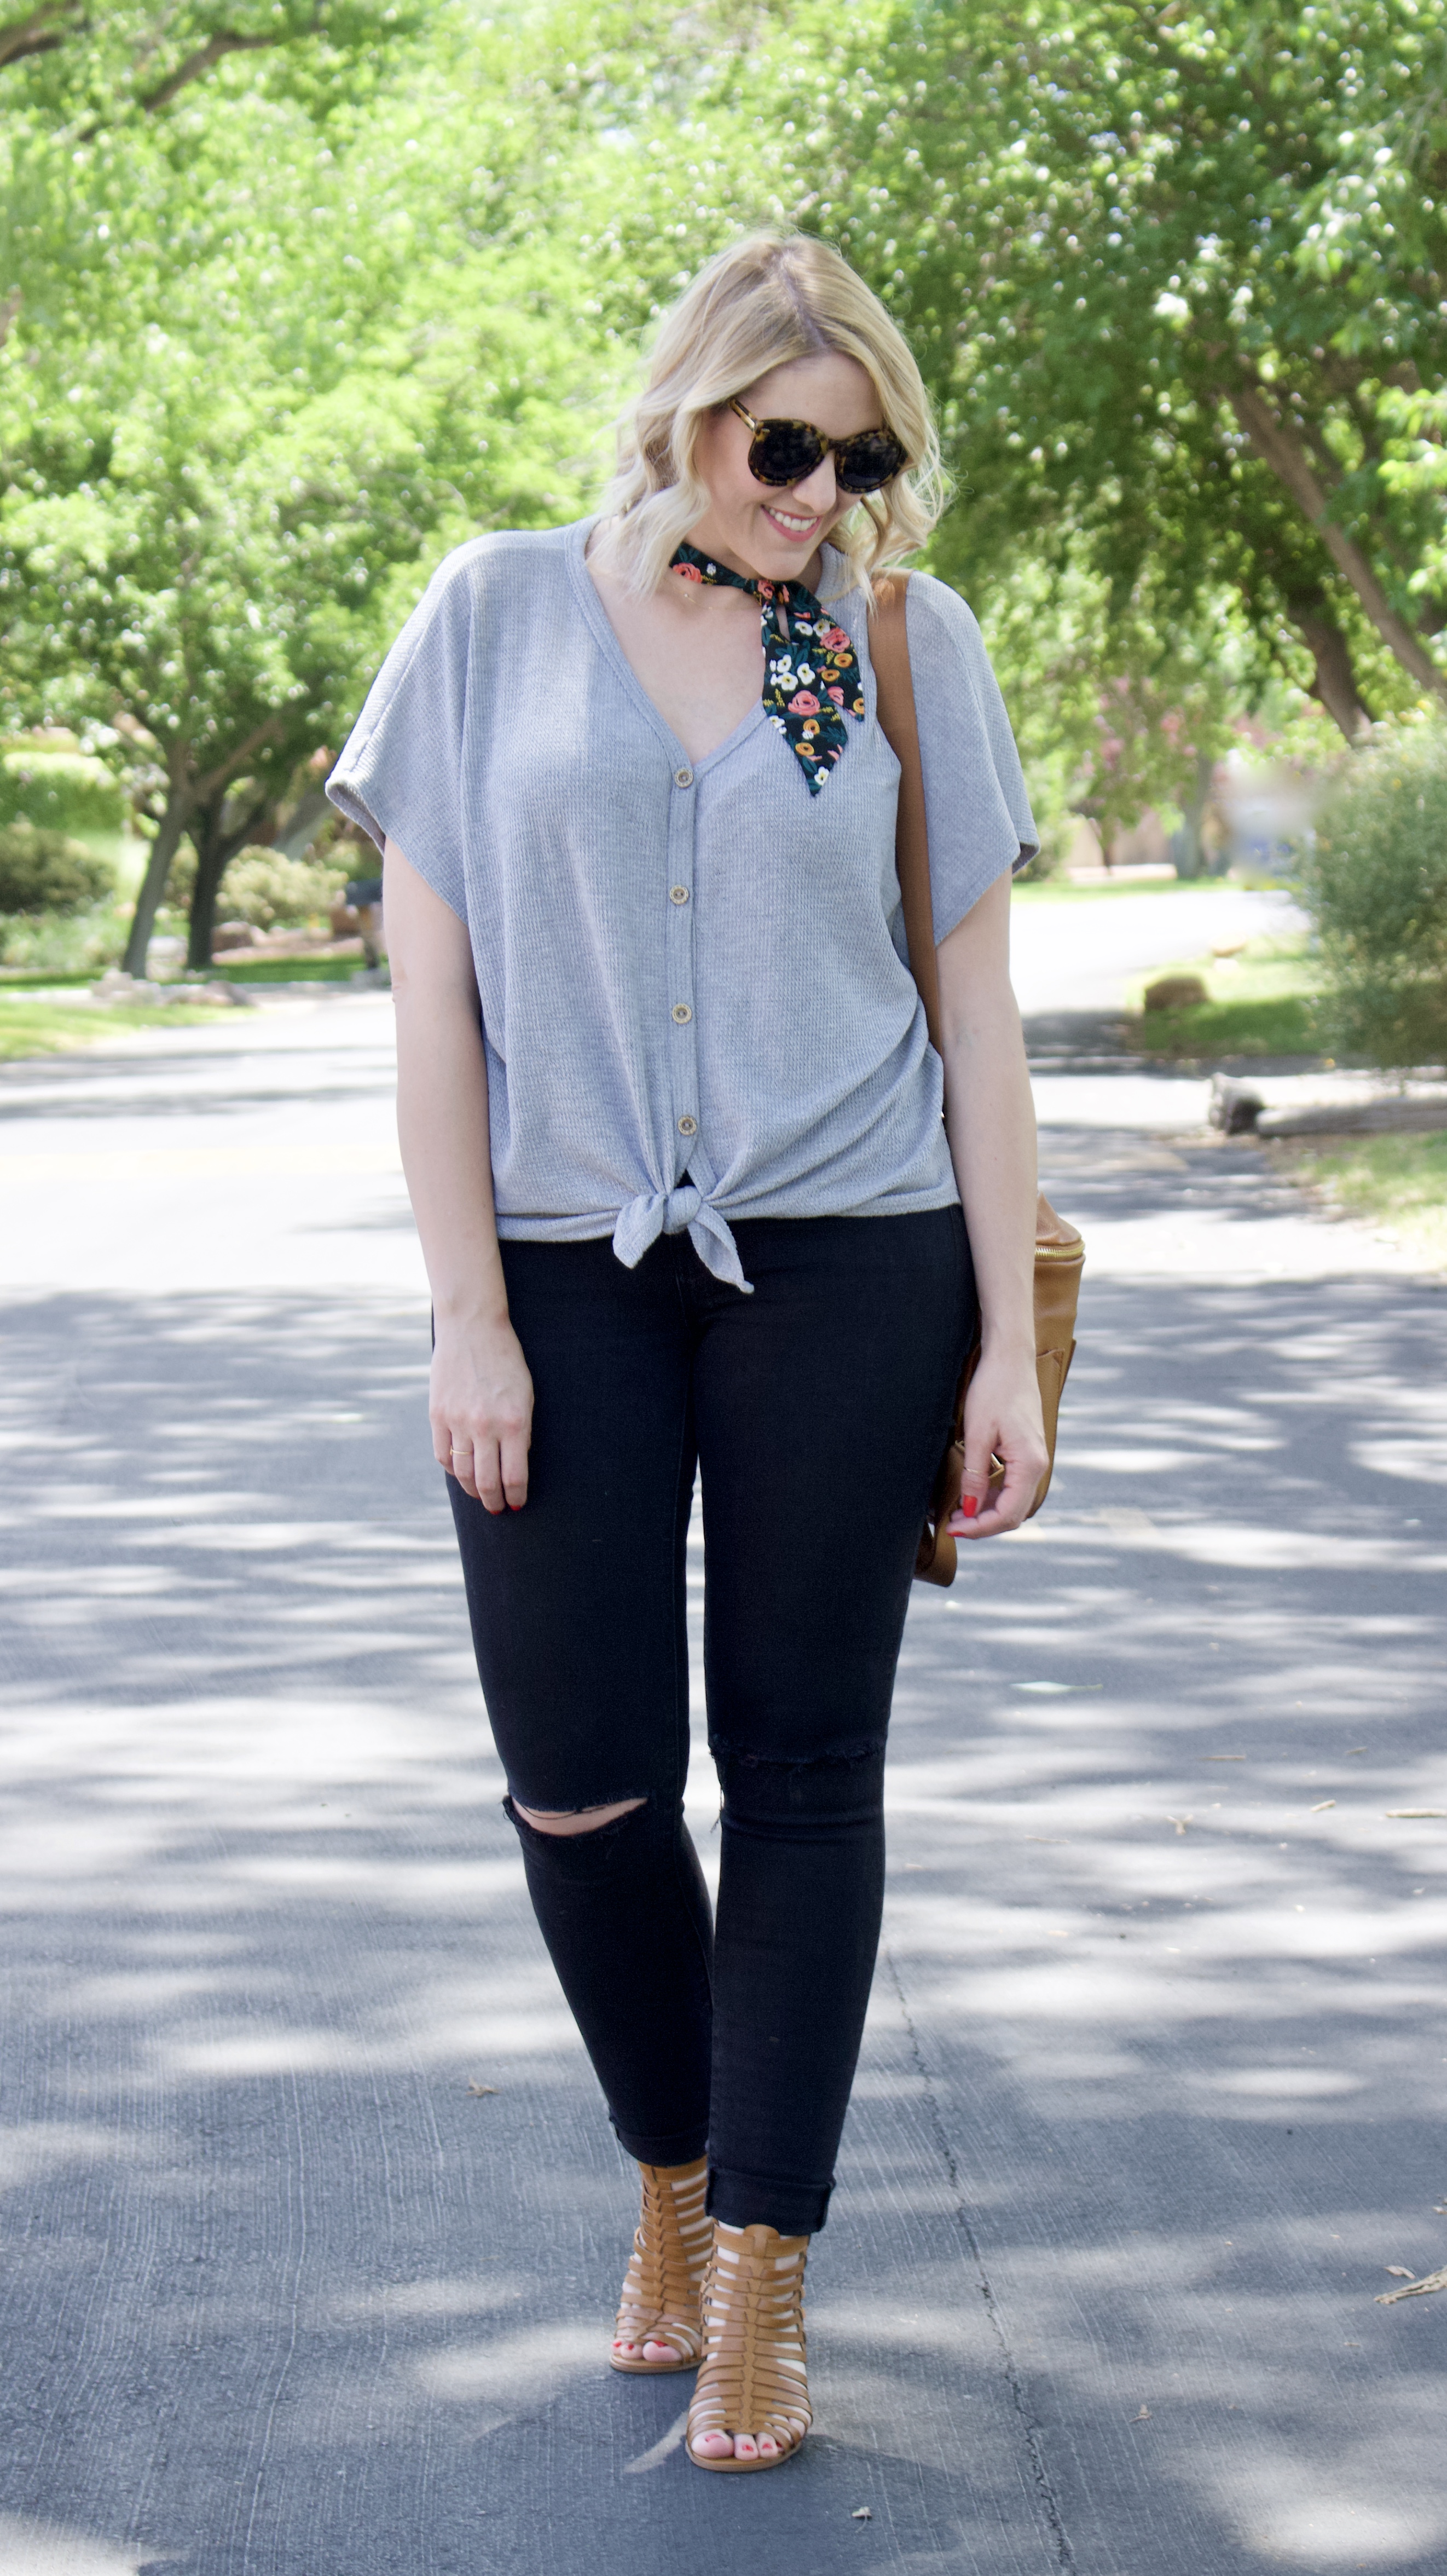 tie front top with distressed jeans #aexme #summerstyle #neckscarf #styleblogger